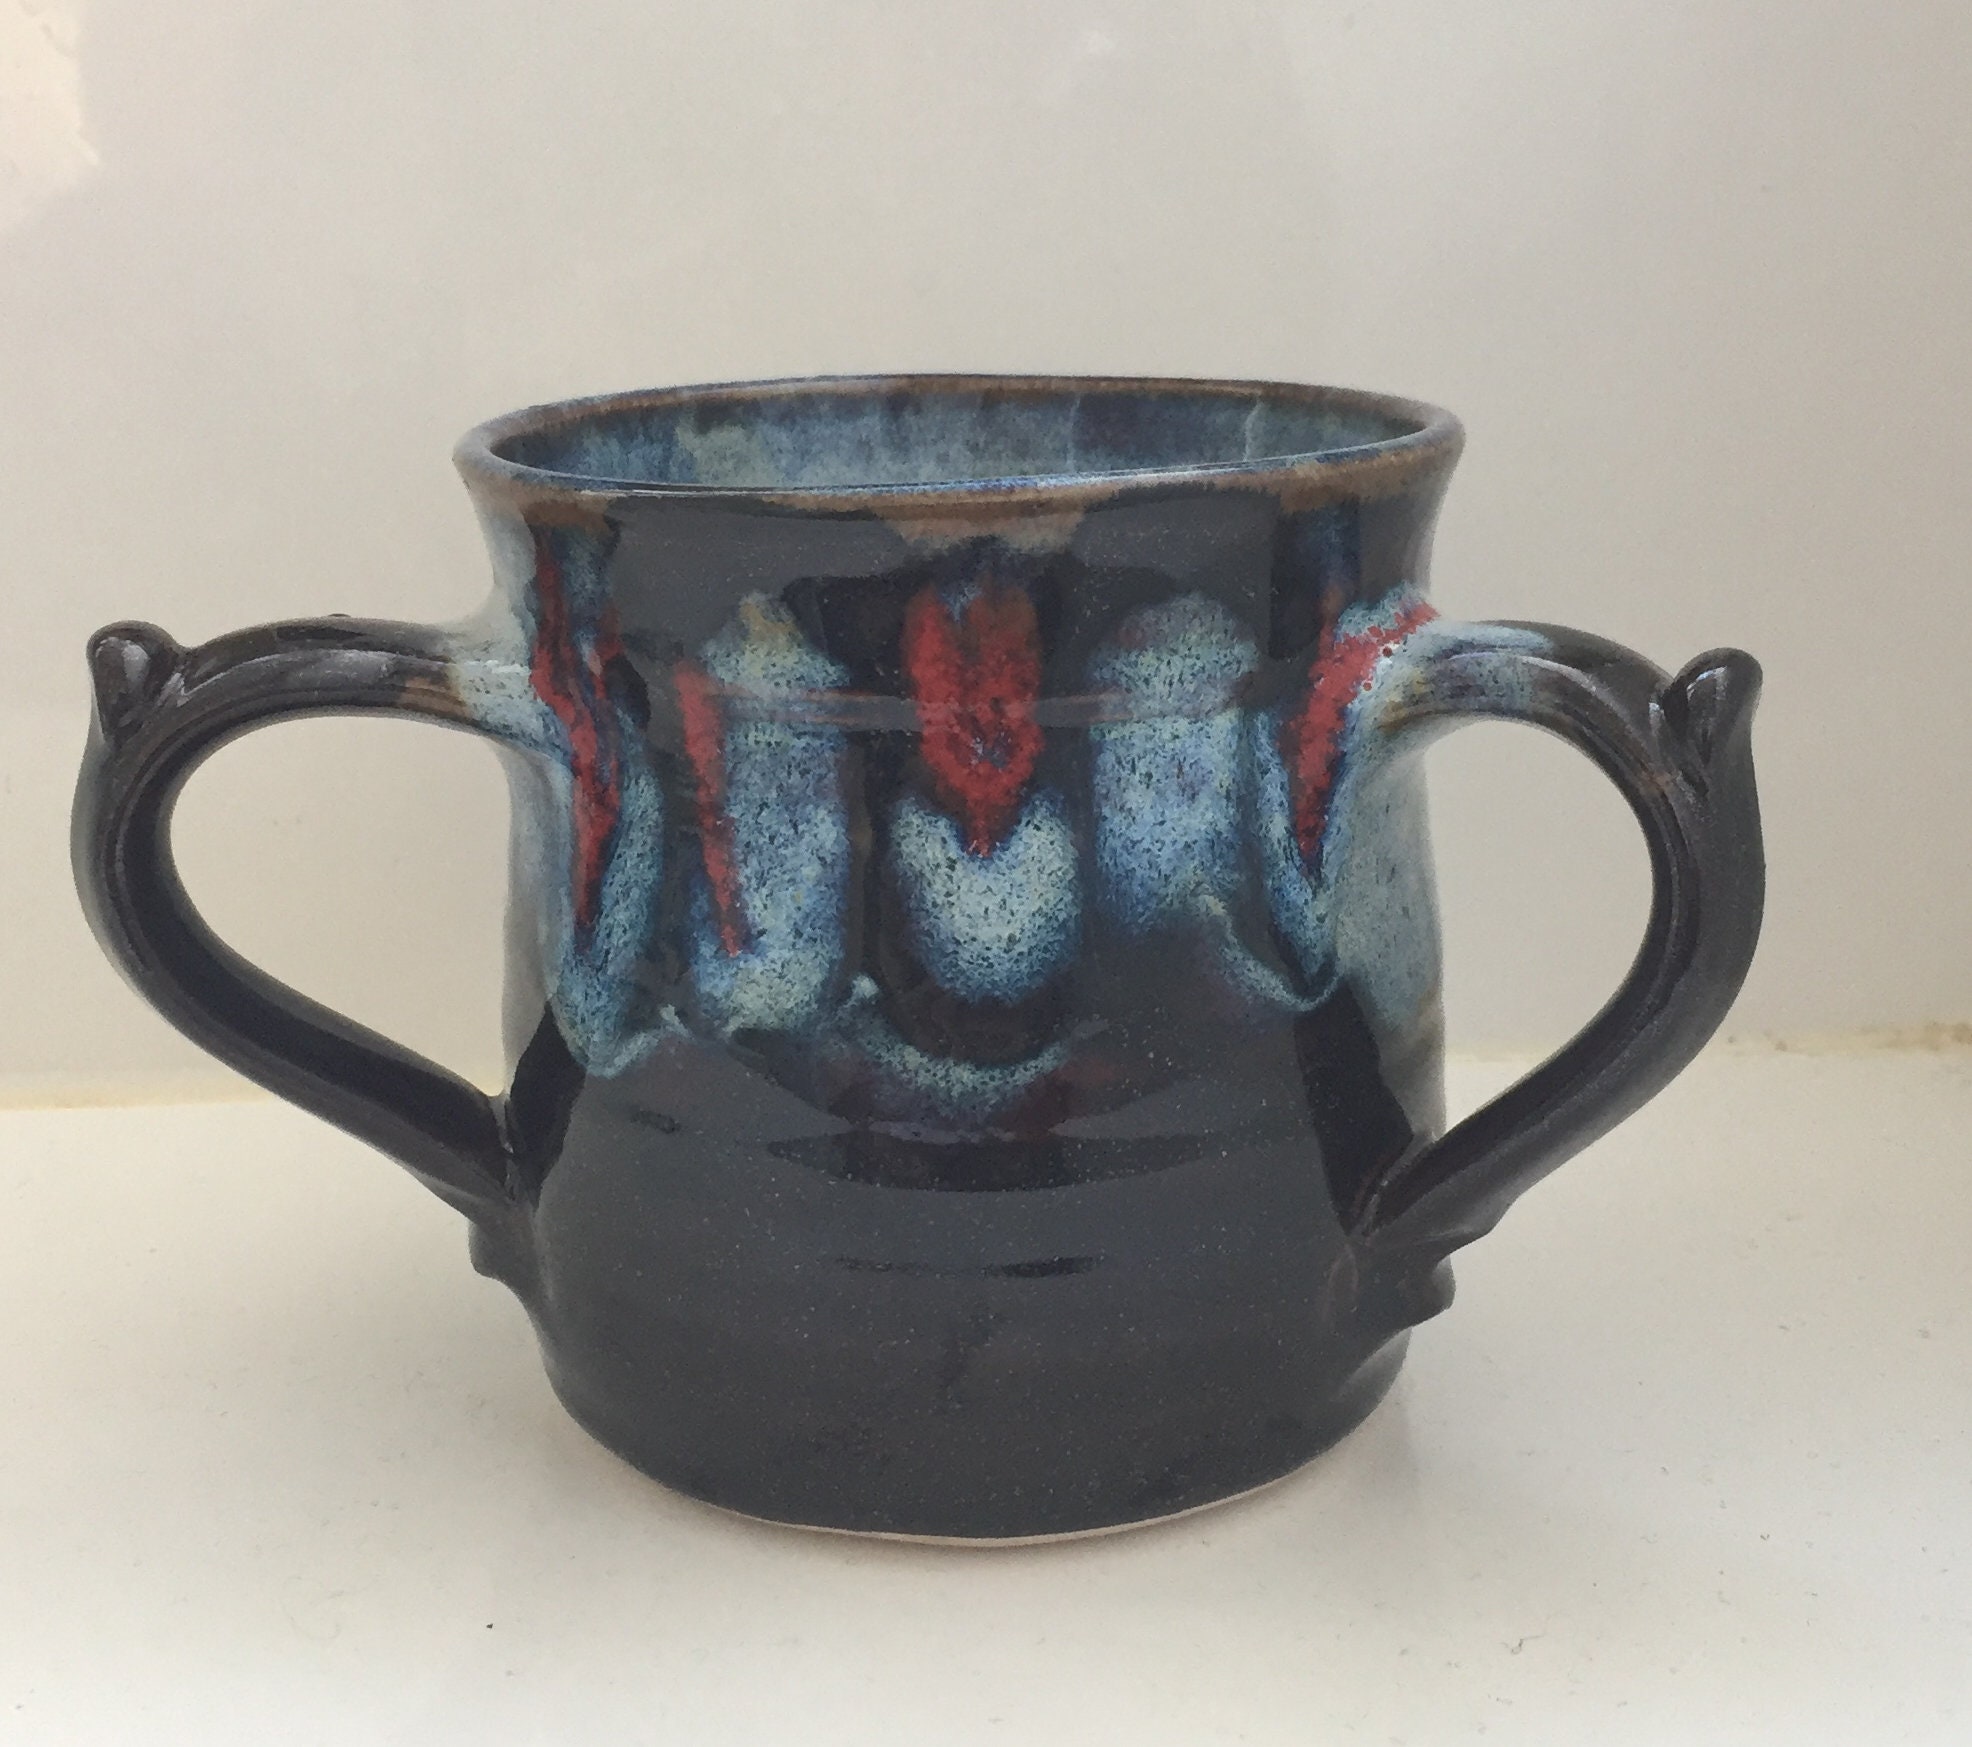 Tall Striped Mug with Two-Finger Handle and Darker Finish